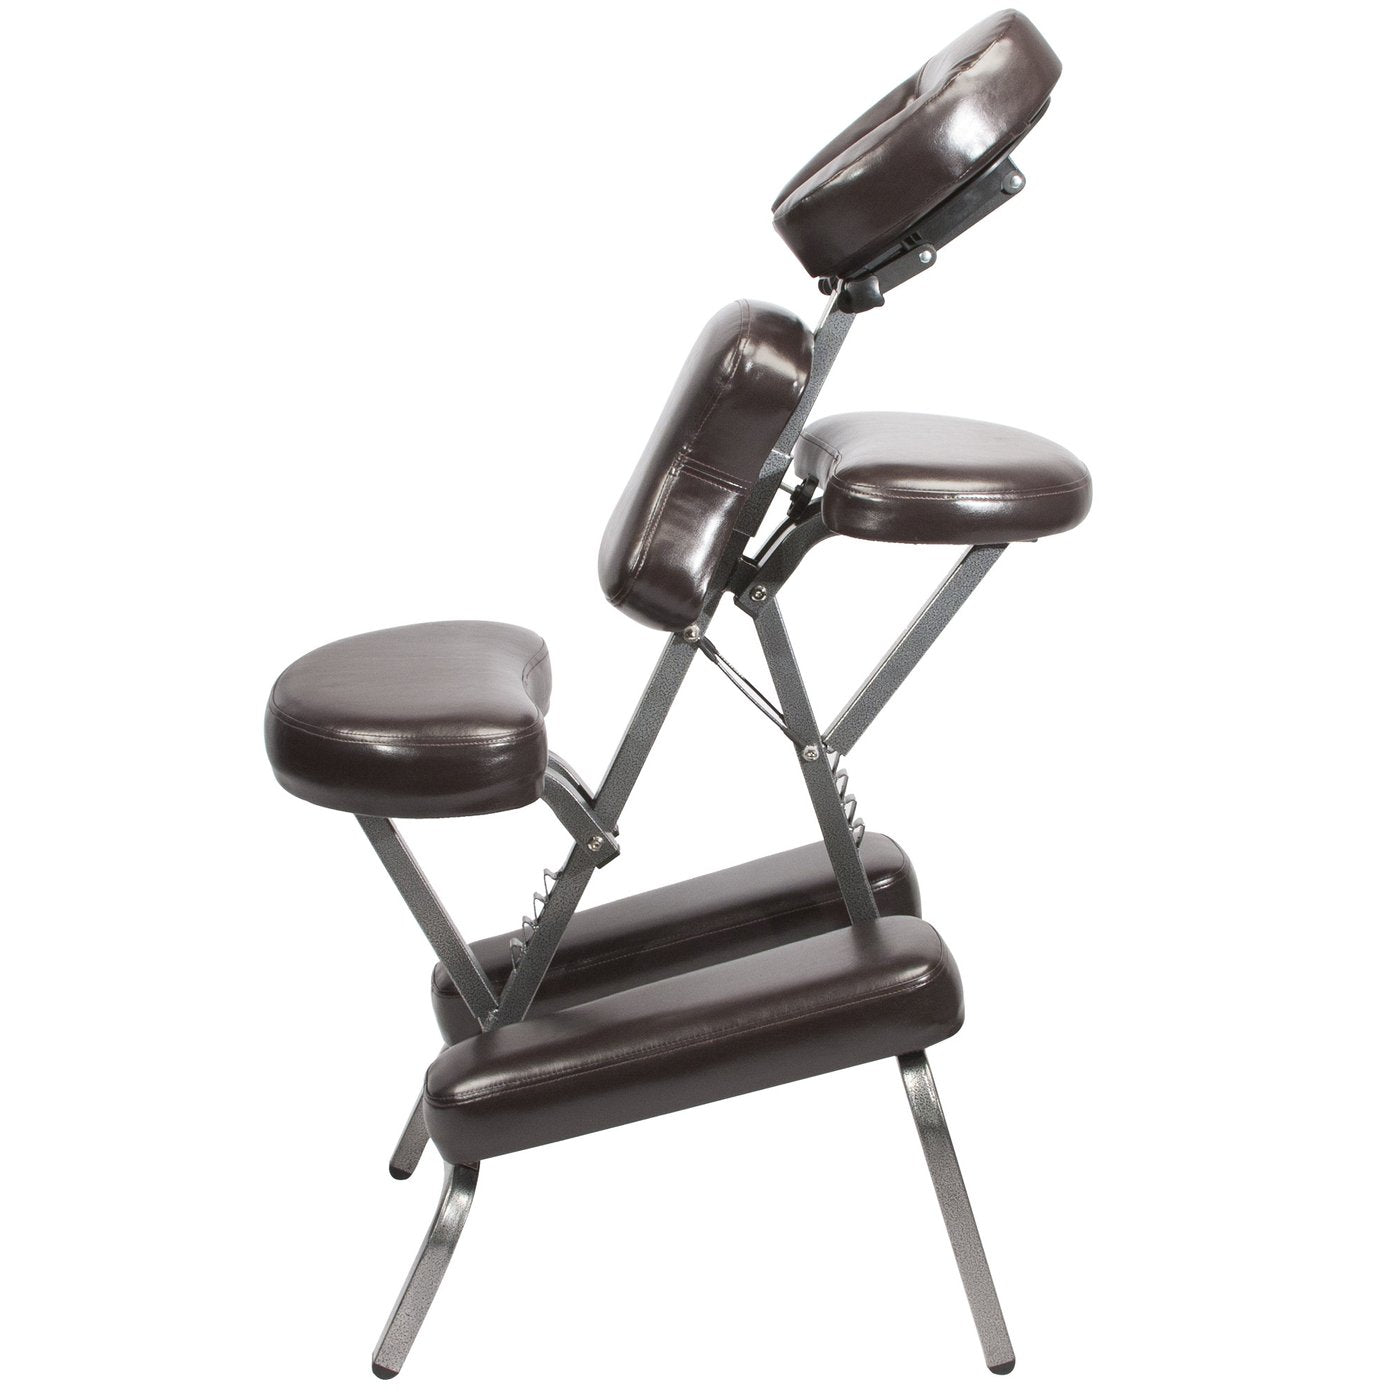 The BEDFORD Portable Massage Chair Package - Starter Chair, Coffee Luster